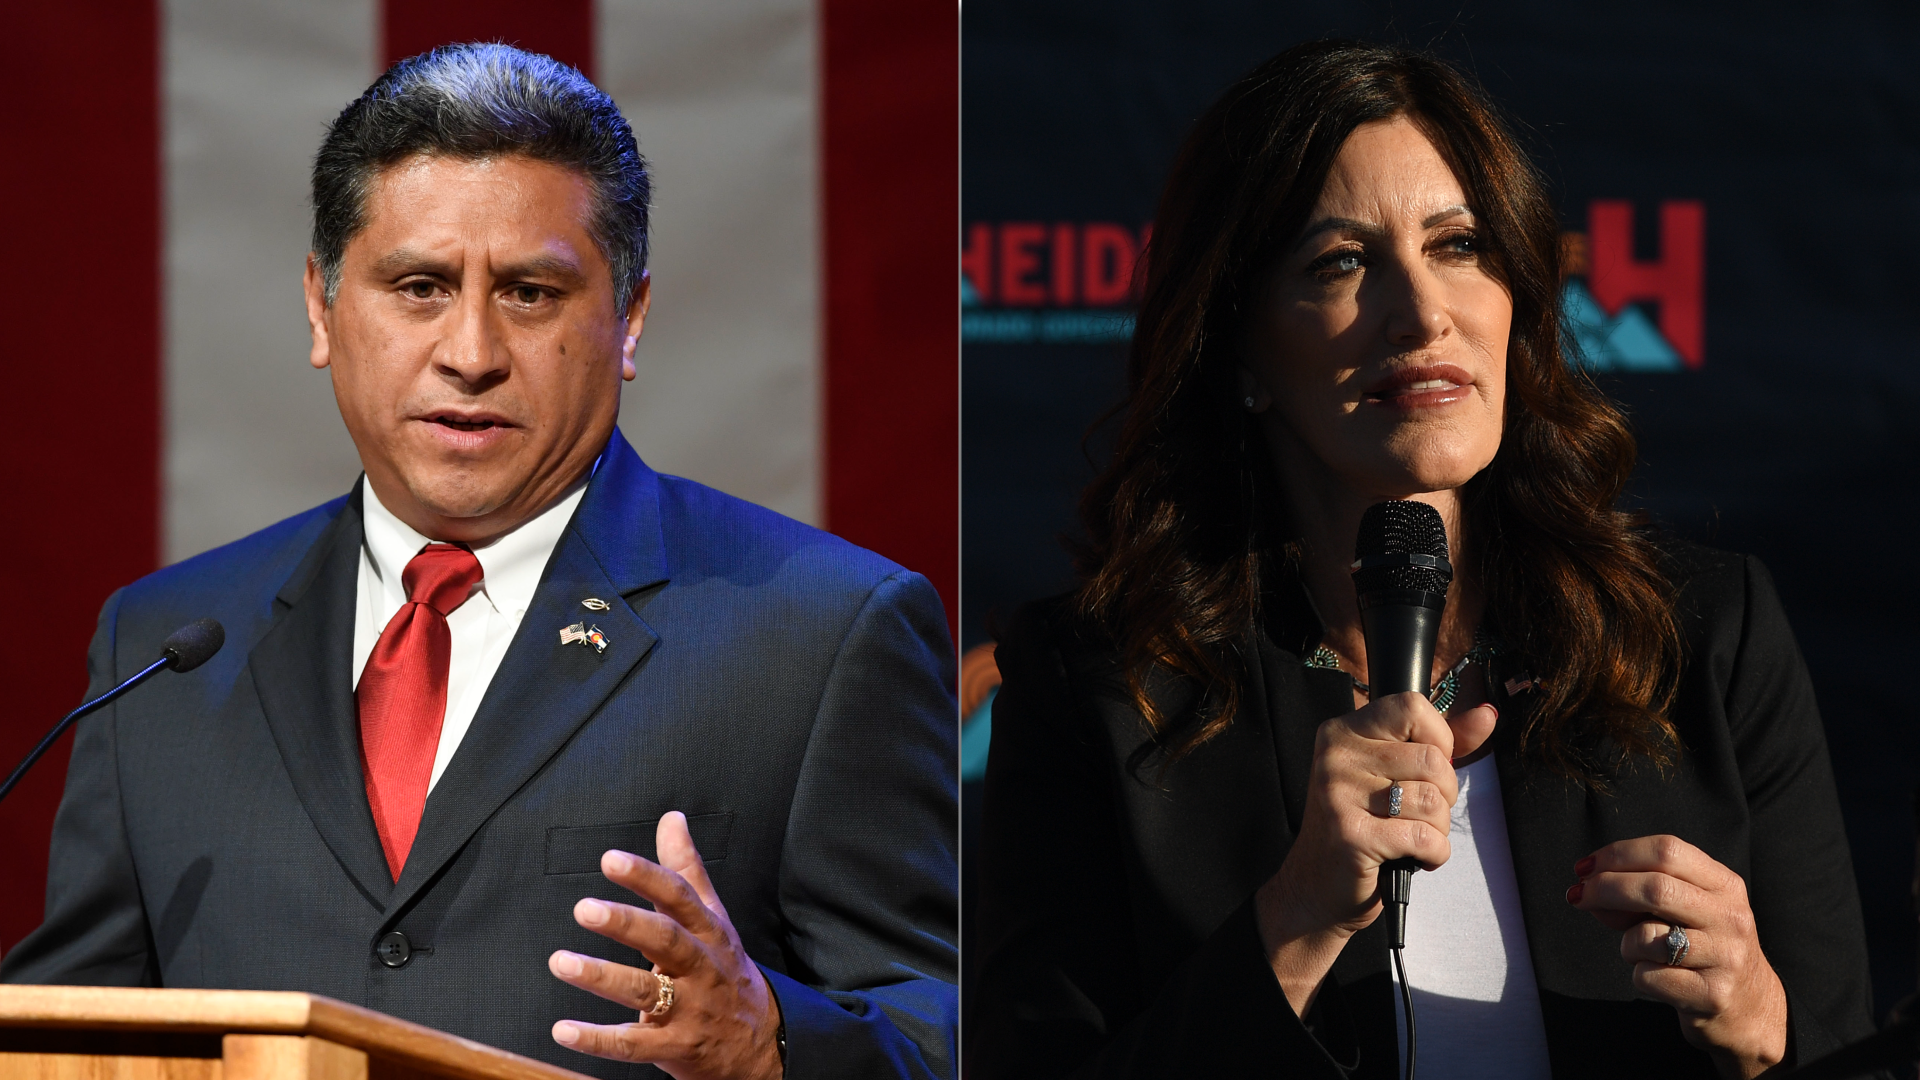 Greg Lopez, left, at a debate in 2018. Heidi Ganahl at a campaign event in 2021. Photos: Andy Cross and RJ Sangosti/Denver Post via Getty Images